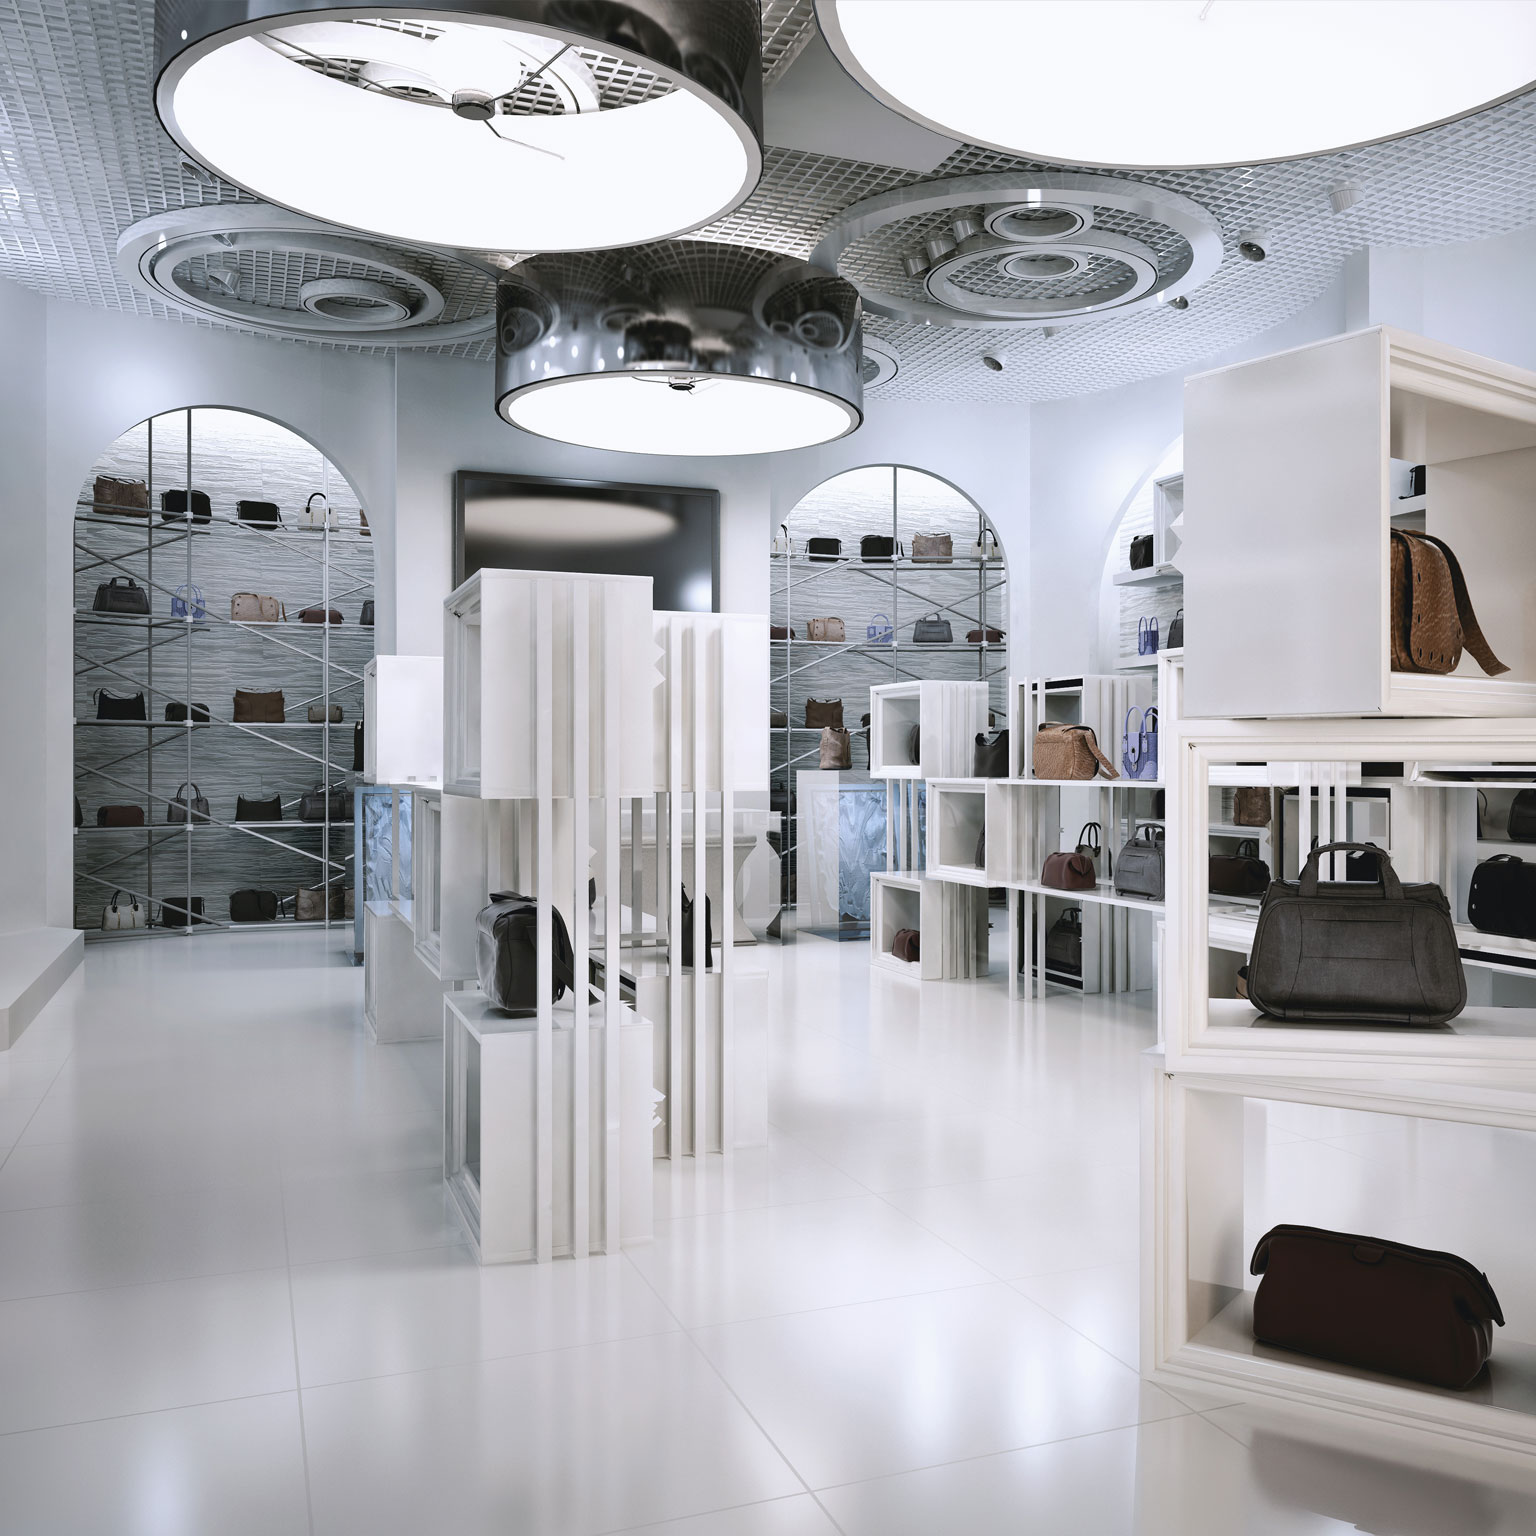 How Lifestyle is the New In-Store Tactic for Luxury Brands